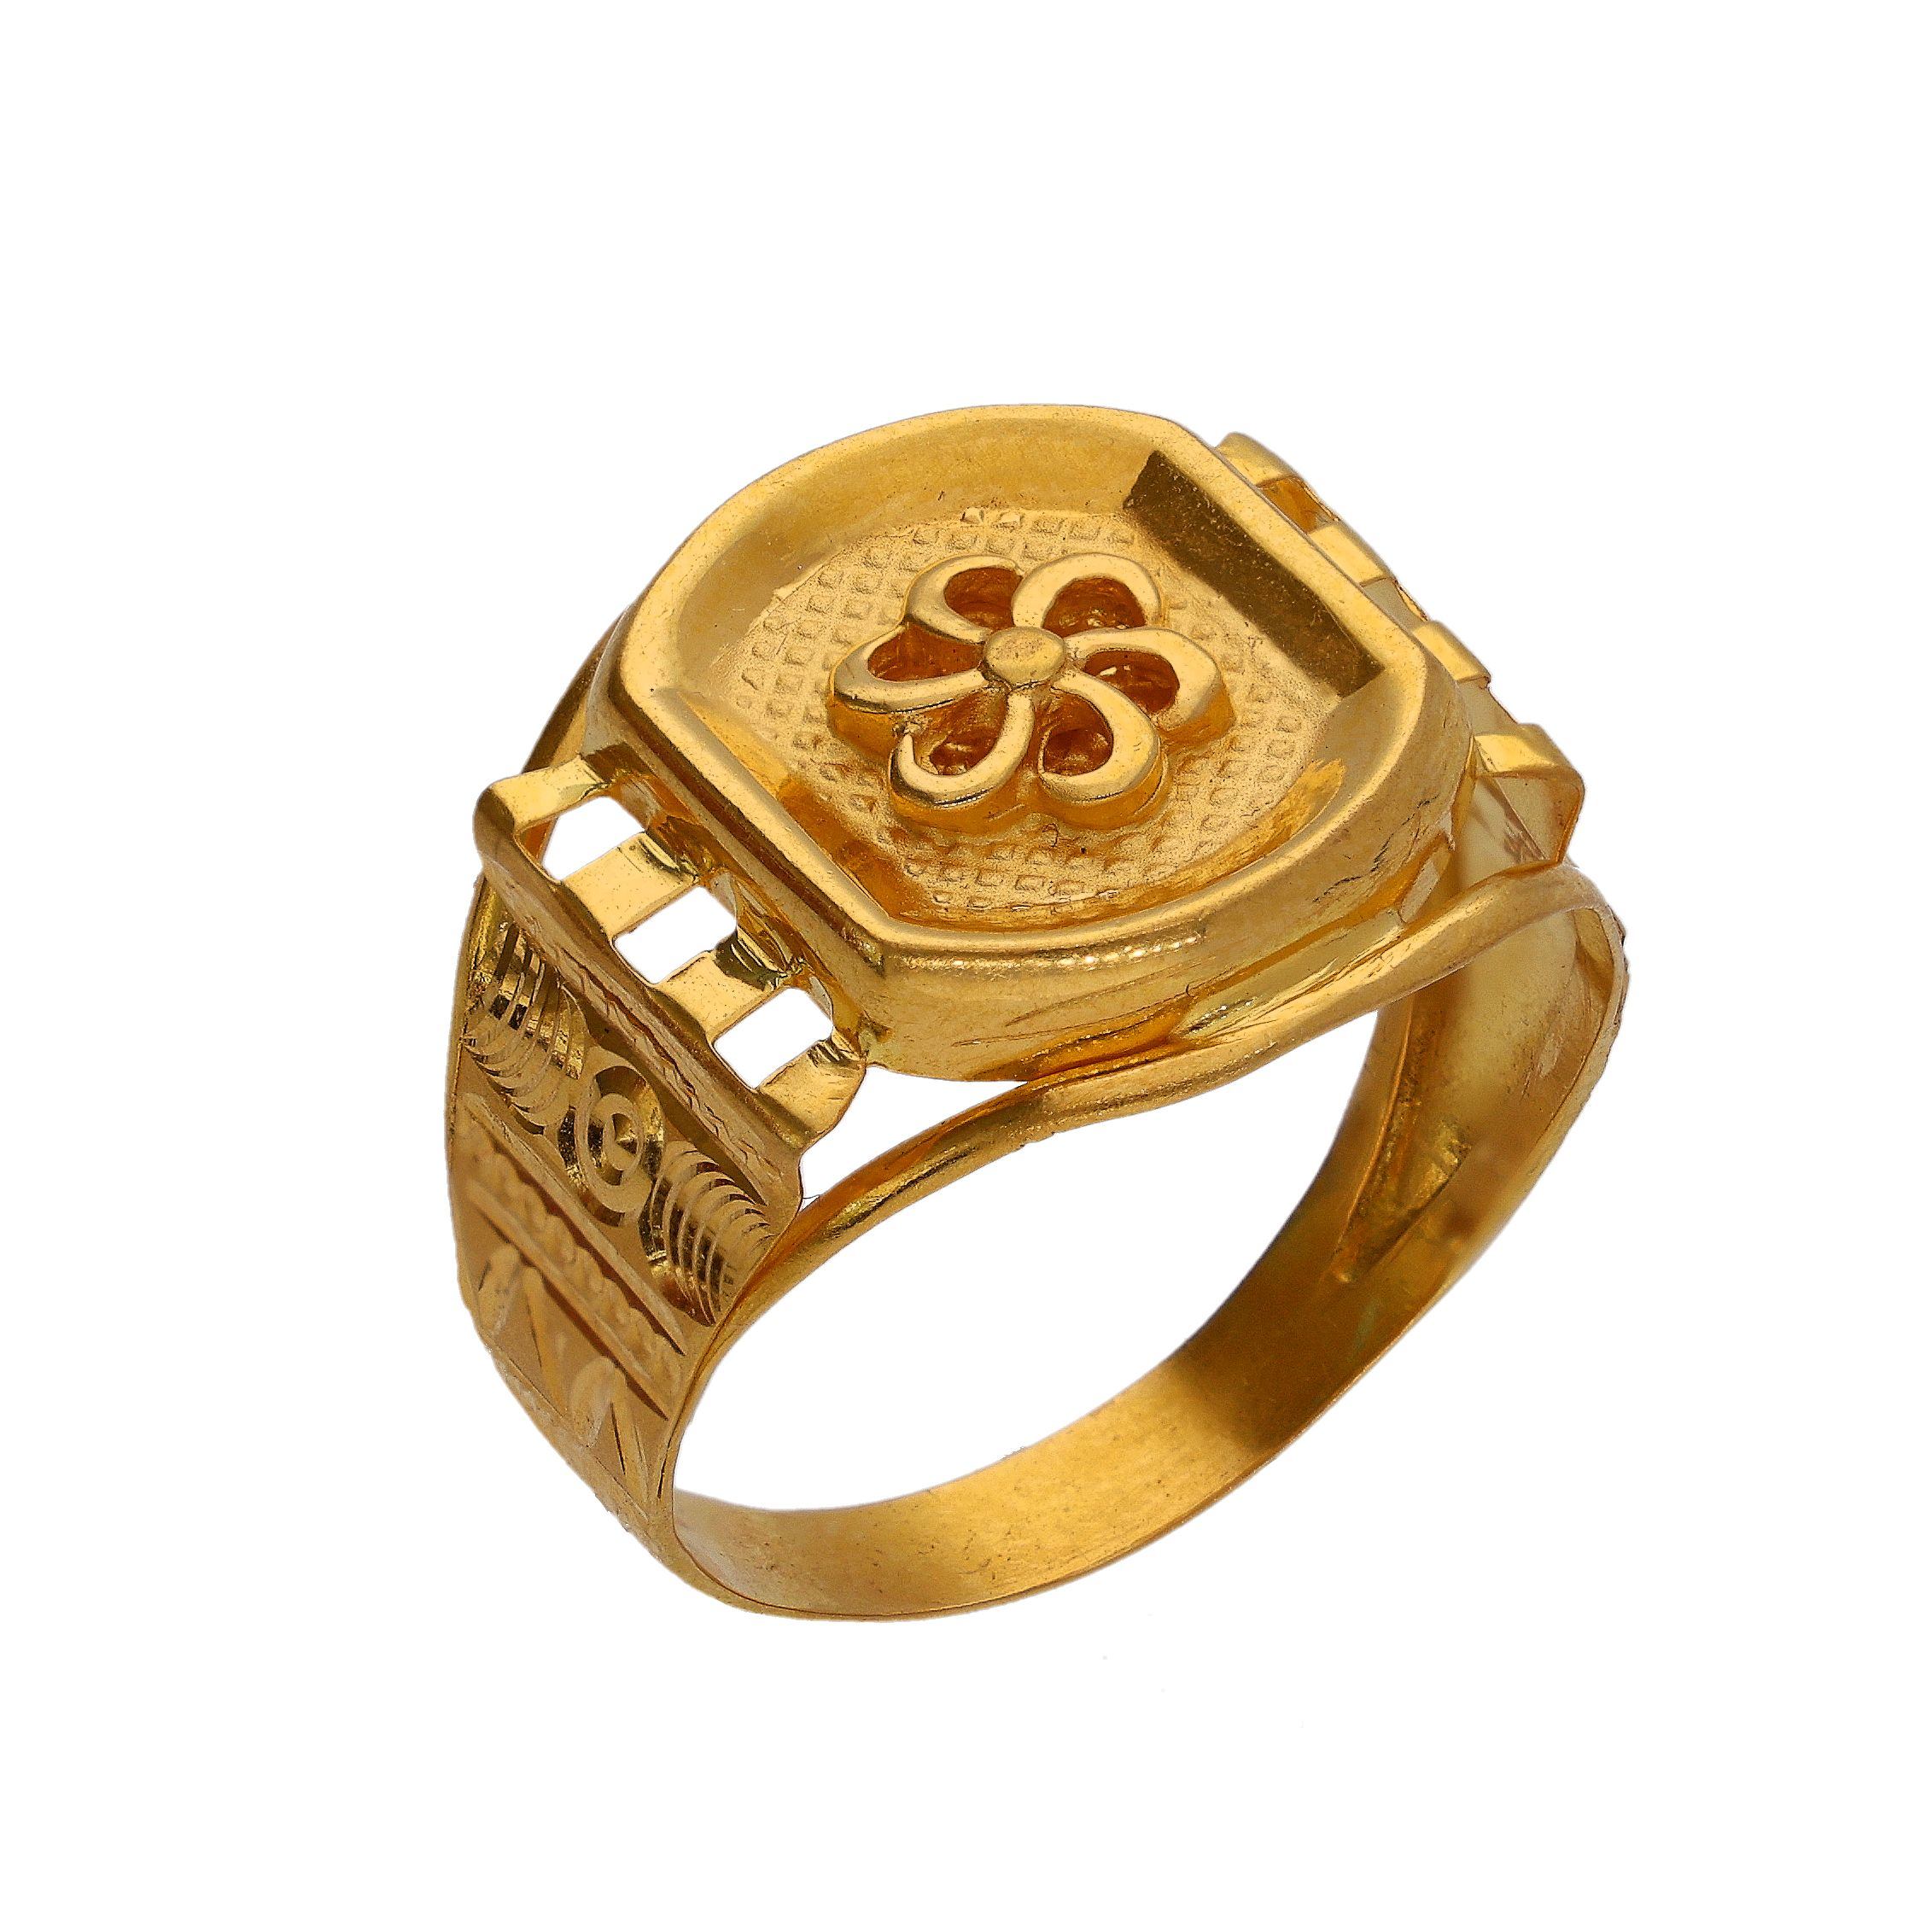 22 Carat Gents Gold Ring - 22 Carat Men Gold Ring Price Starting From Rs  32,000/Pc. Find Verified Sellers in Panipat - JdMart